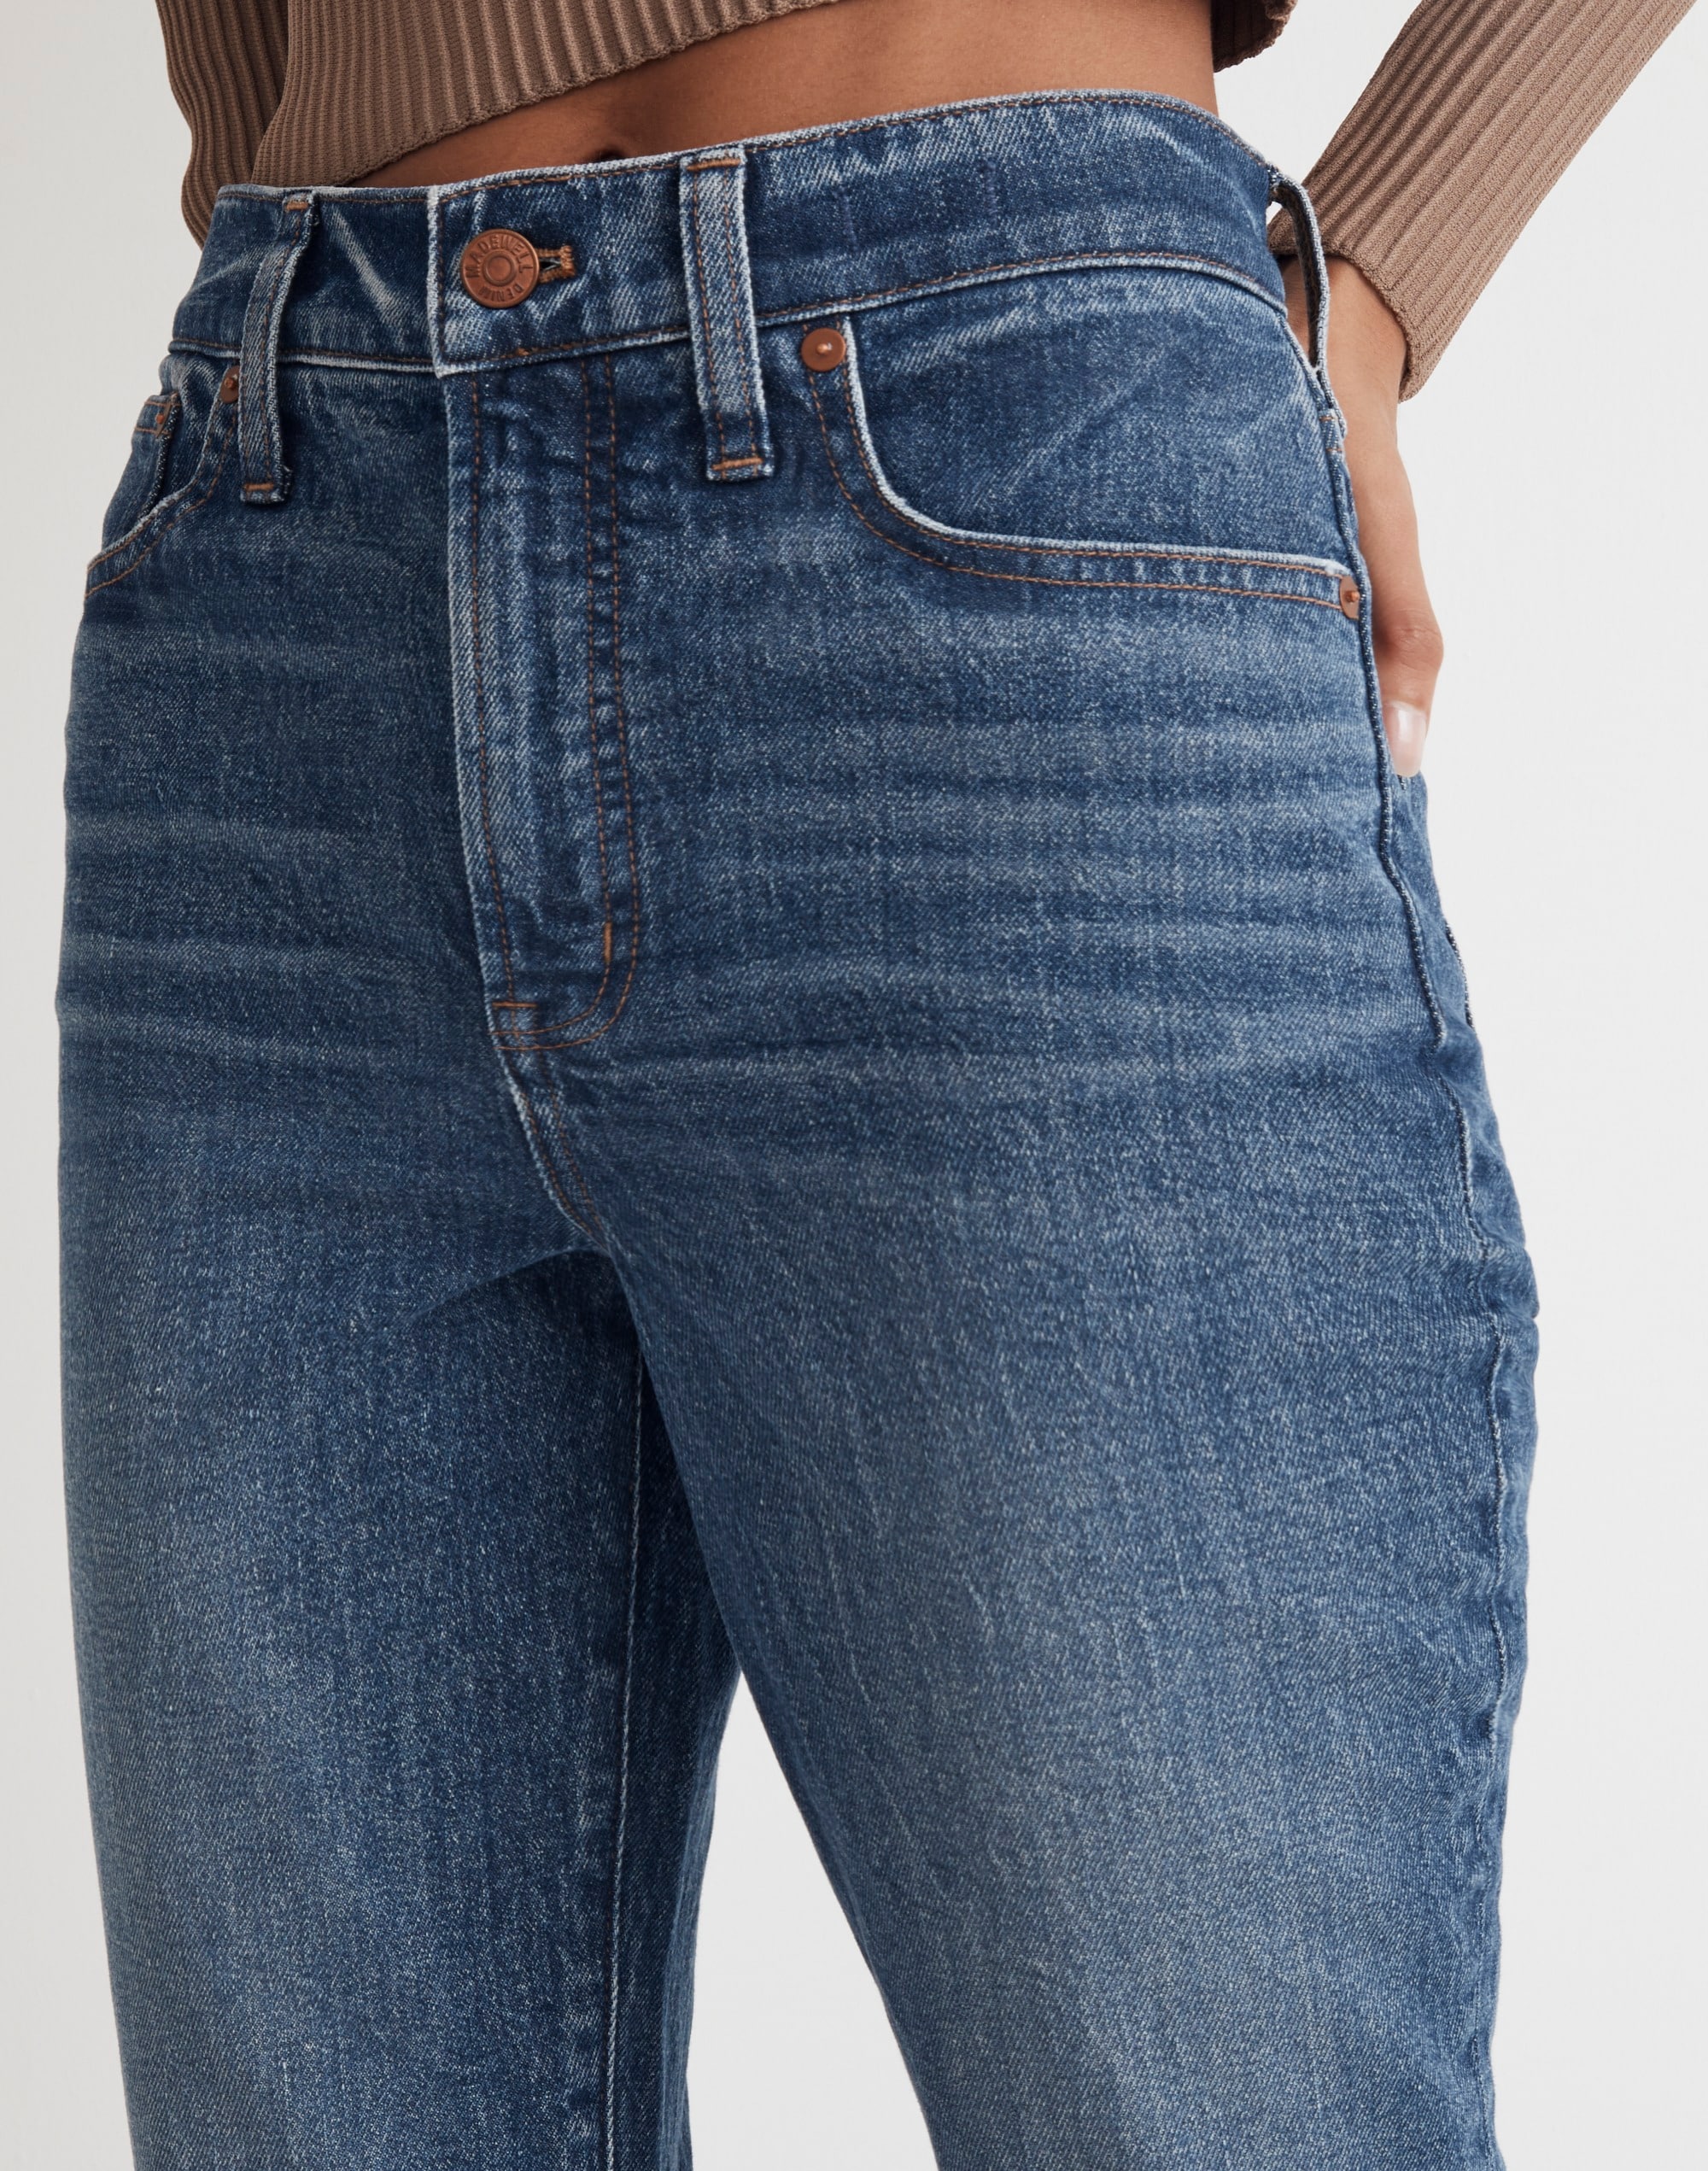 The Tall Perfect Vintage Jean in Decatur Wash